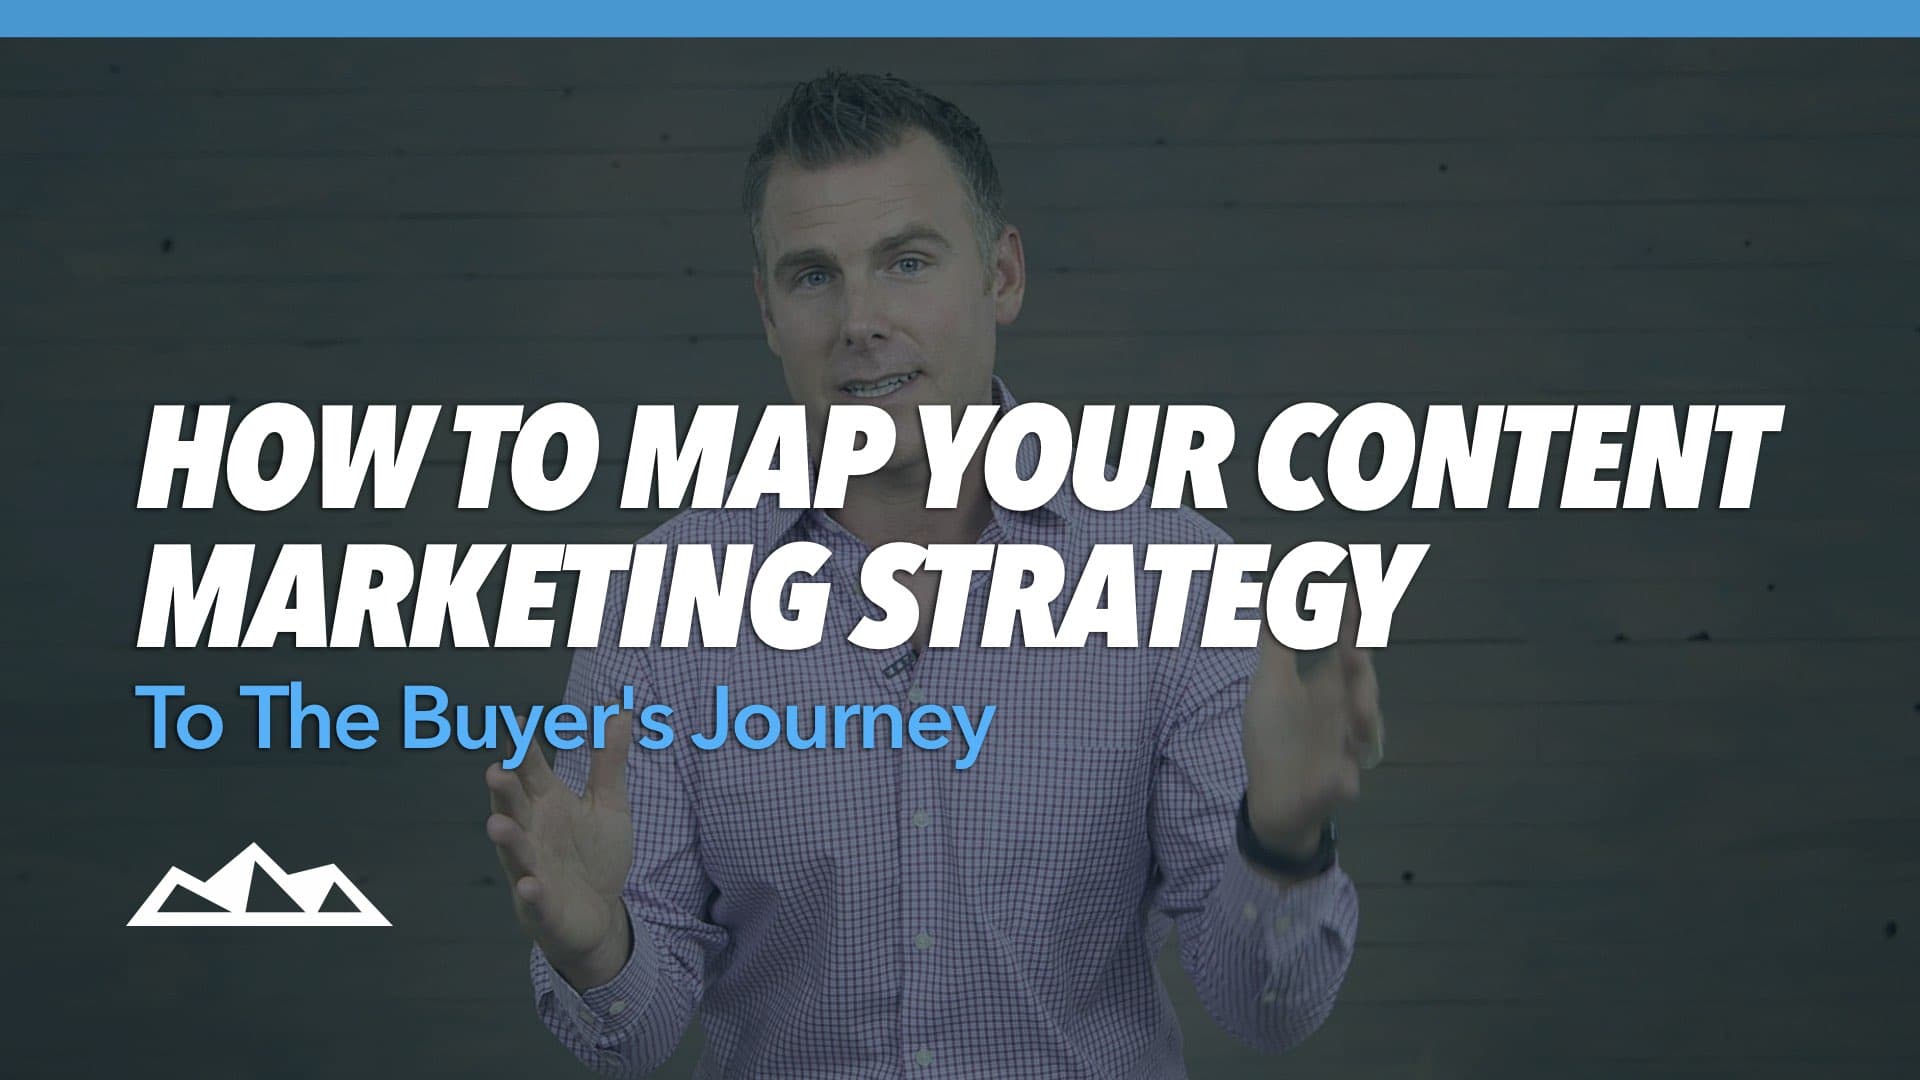 How Startups Should Map Their Content Marketing Strategy To The Buyer’s Journey